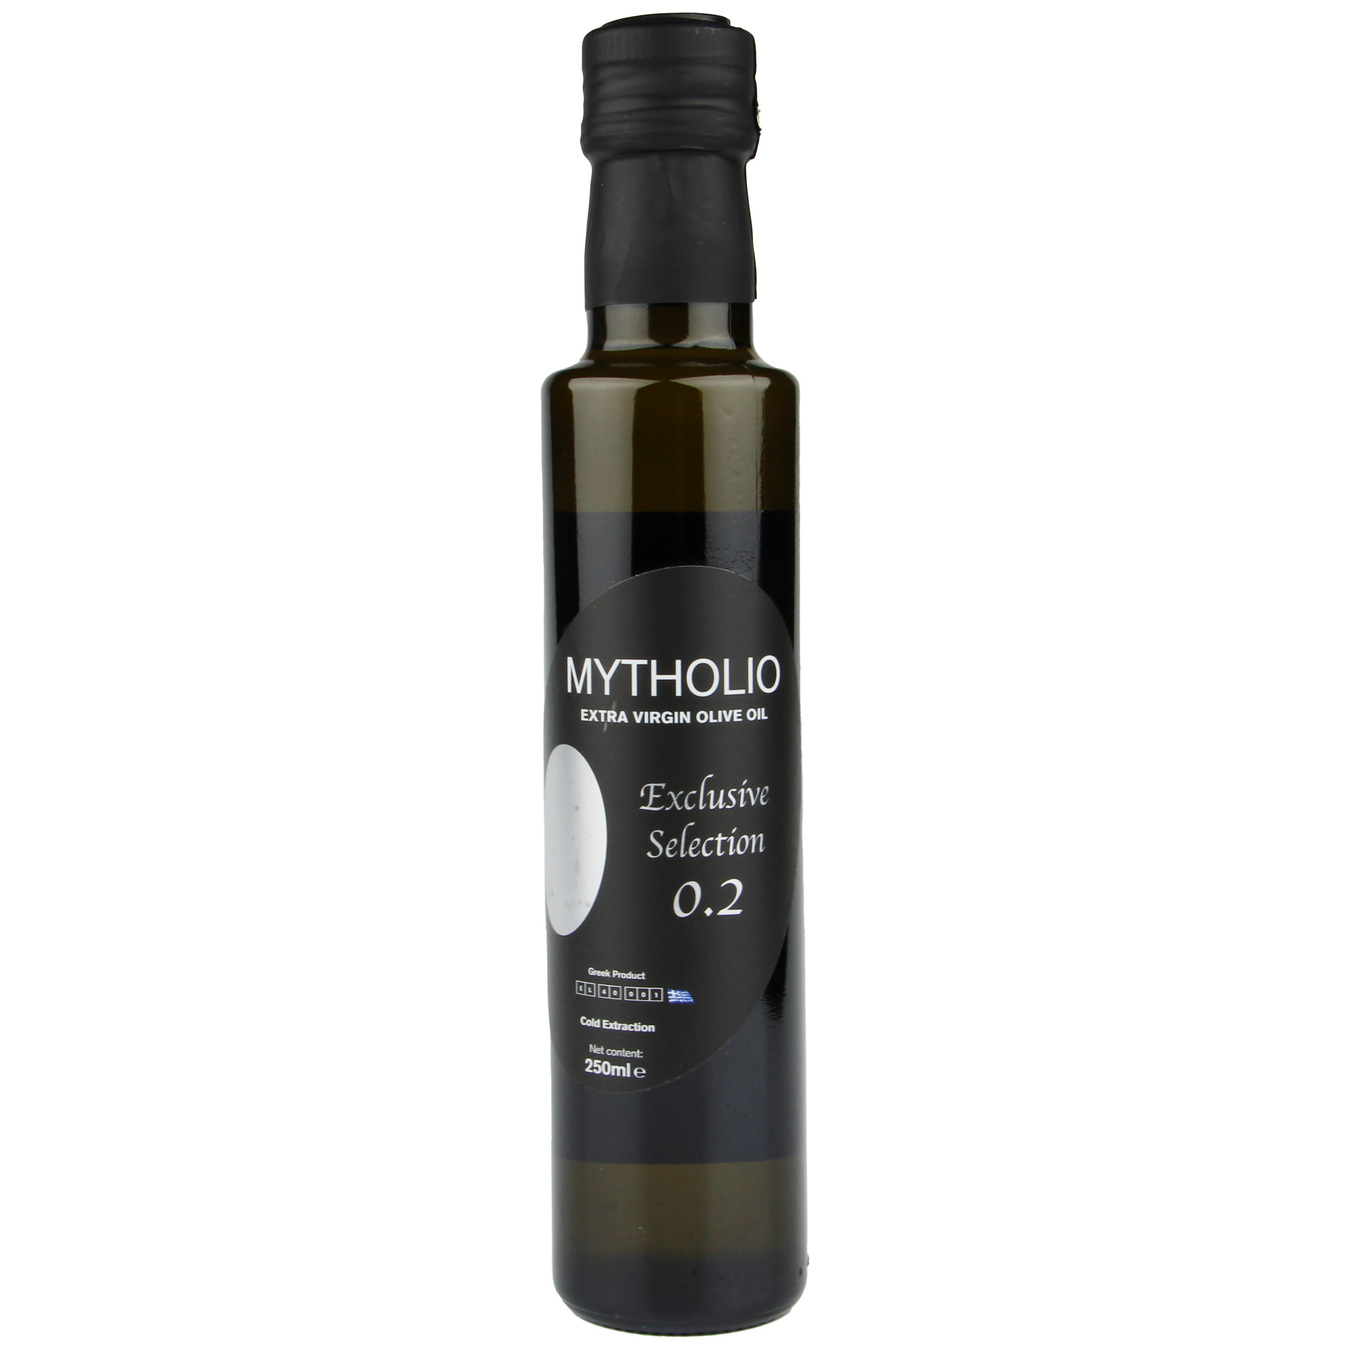 Mytholio Exclusive Selection Extra Virgin Olive Oil 250ml glass